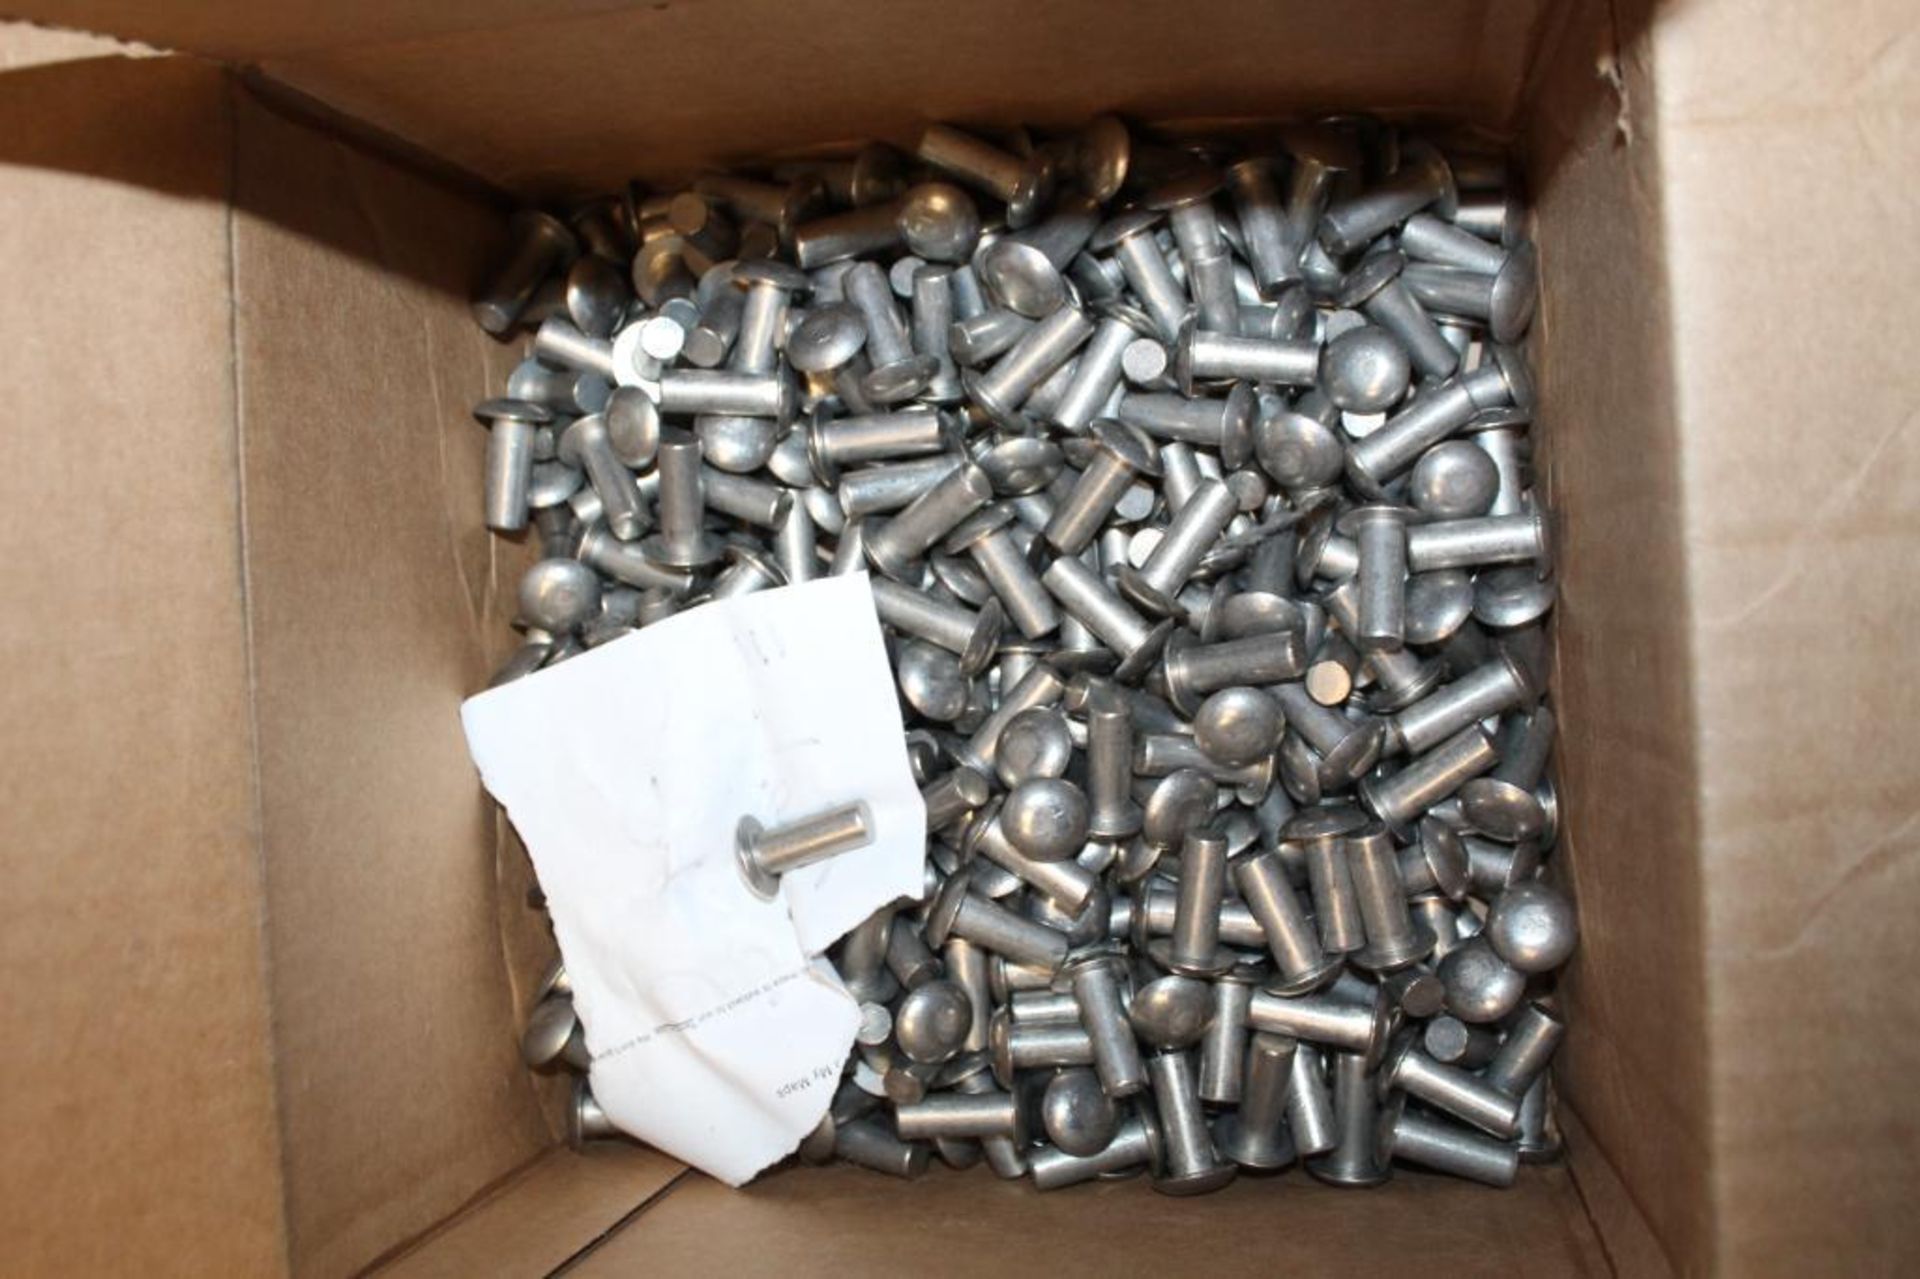 Lot of (9) Boxes and (1) Blue Bin of Assorted Pins, Bolts, Washers and Nuts